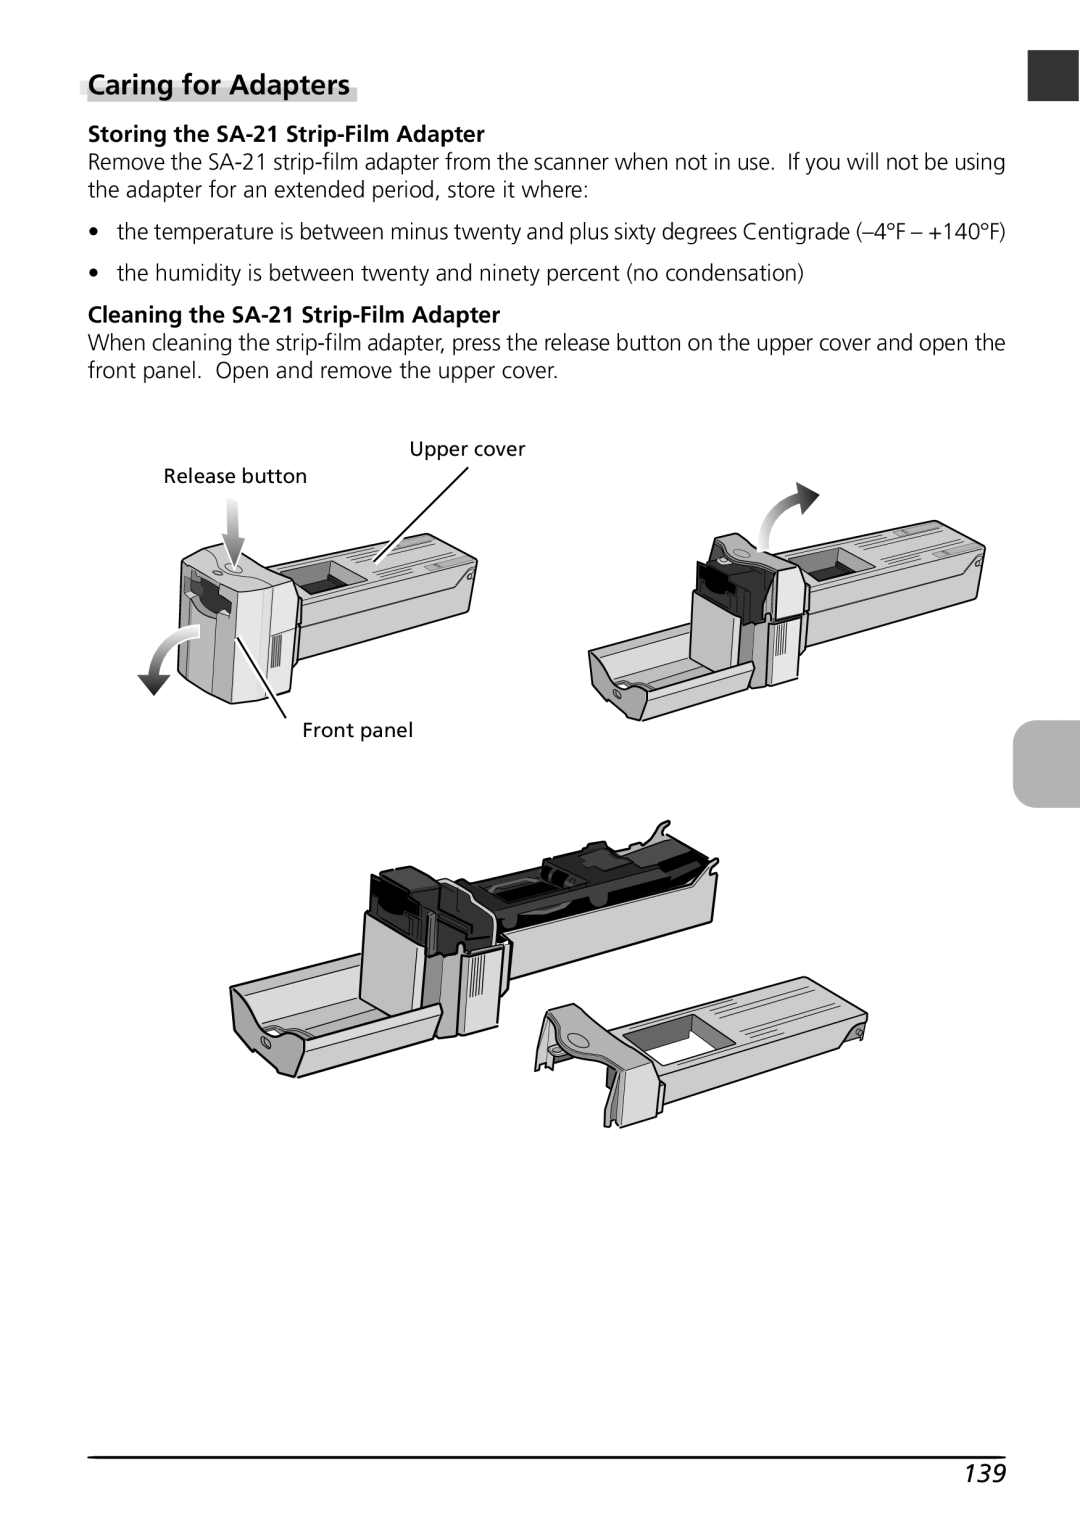 Nikon LS4000 user manual Caring for Adapters, Storing the SA-21 Strip-Film Adapter, Cleaning the SA-21 Strip-Film Adapter 